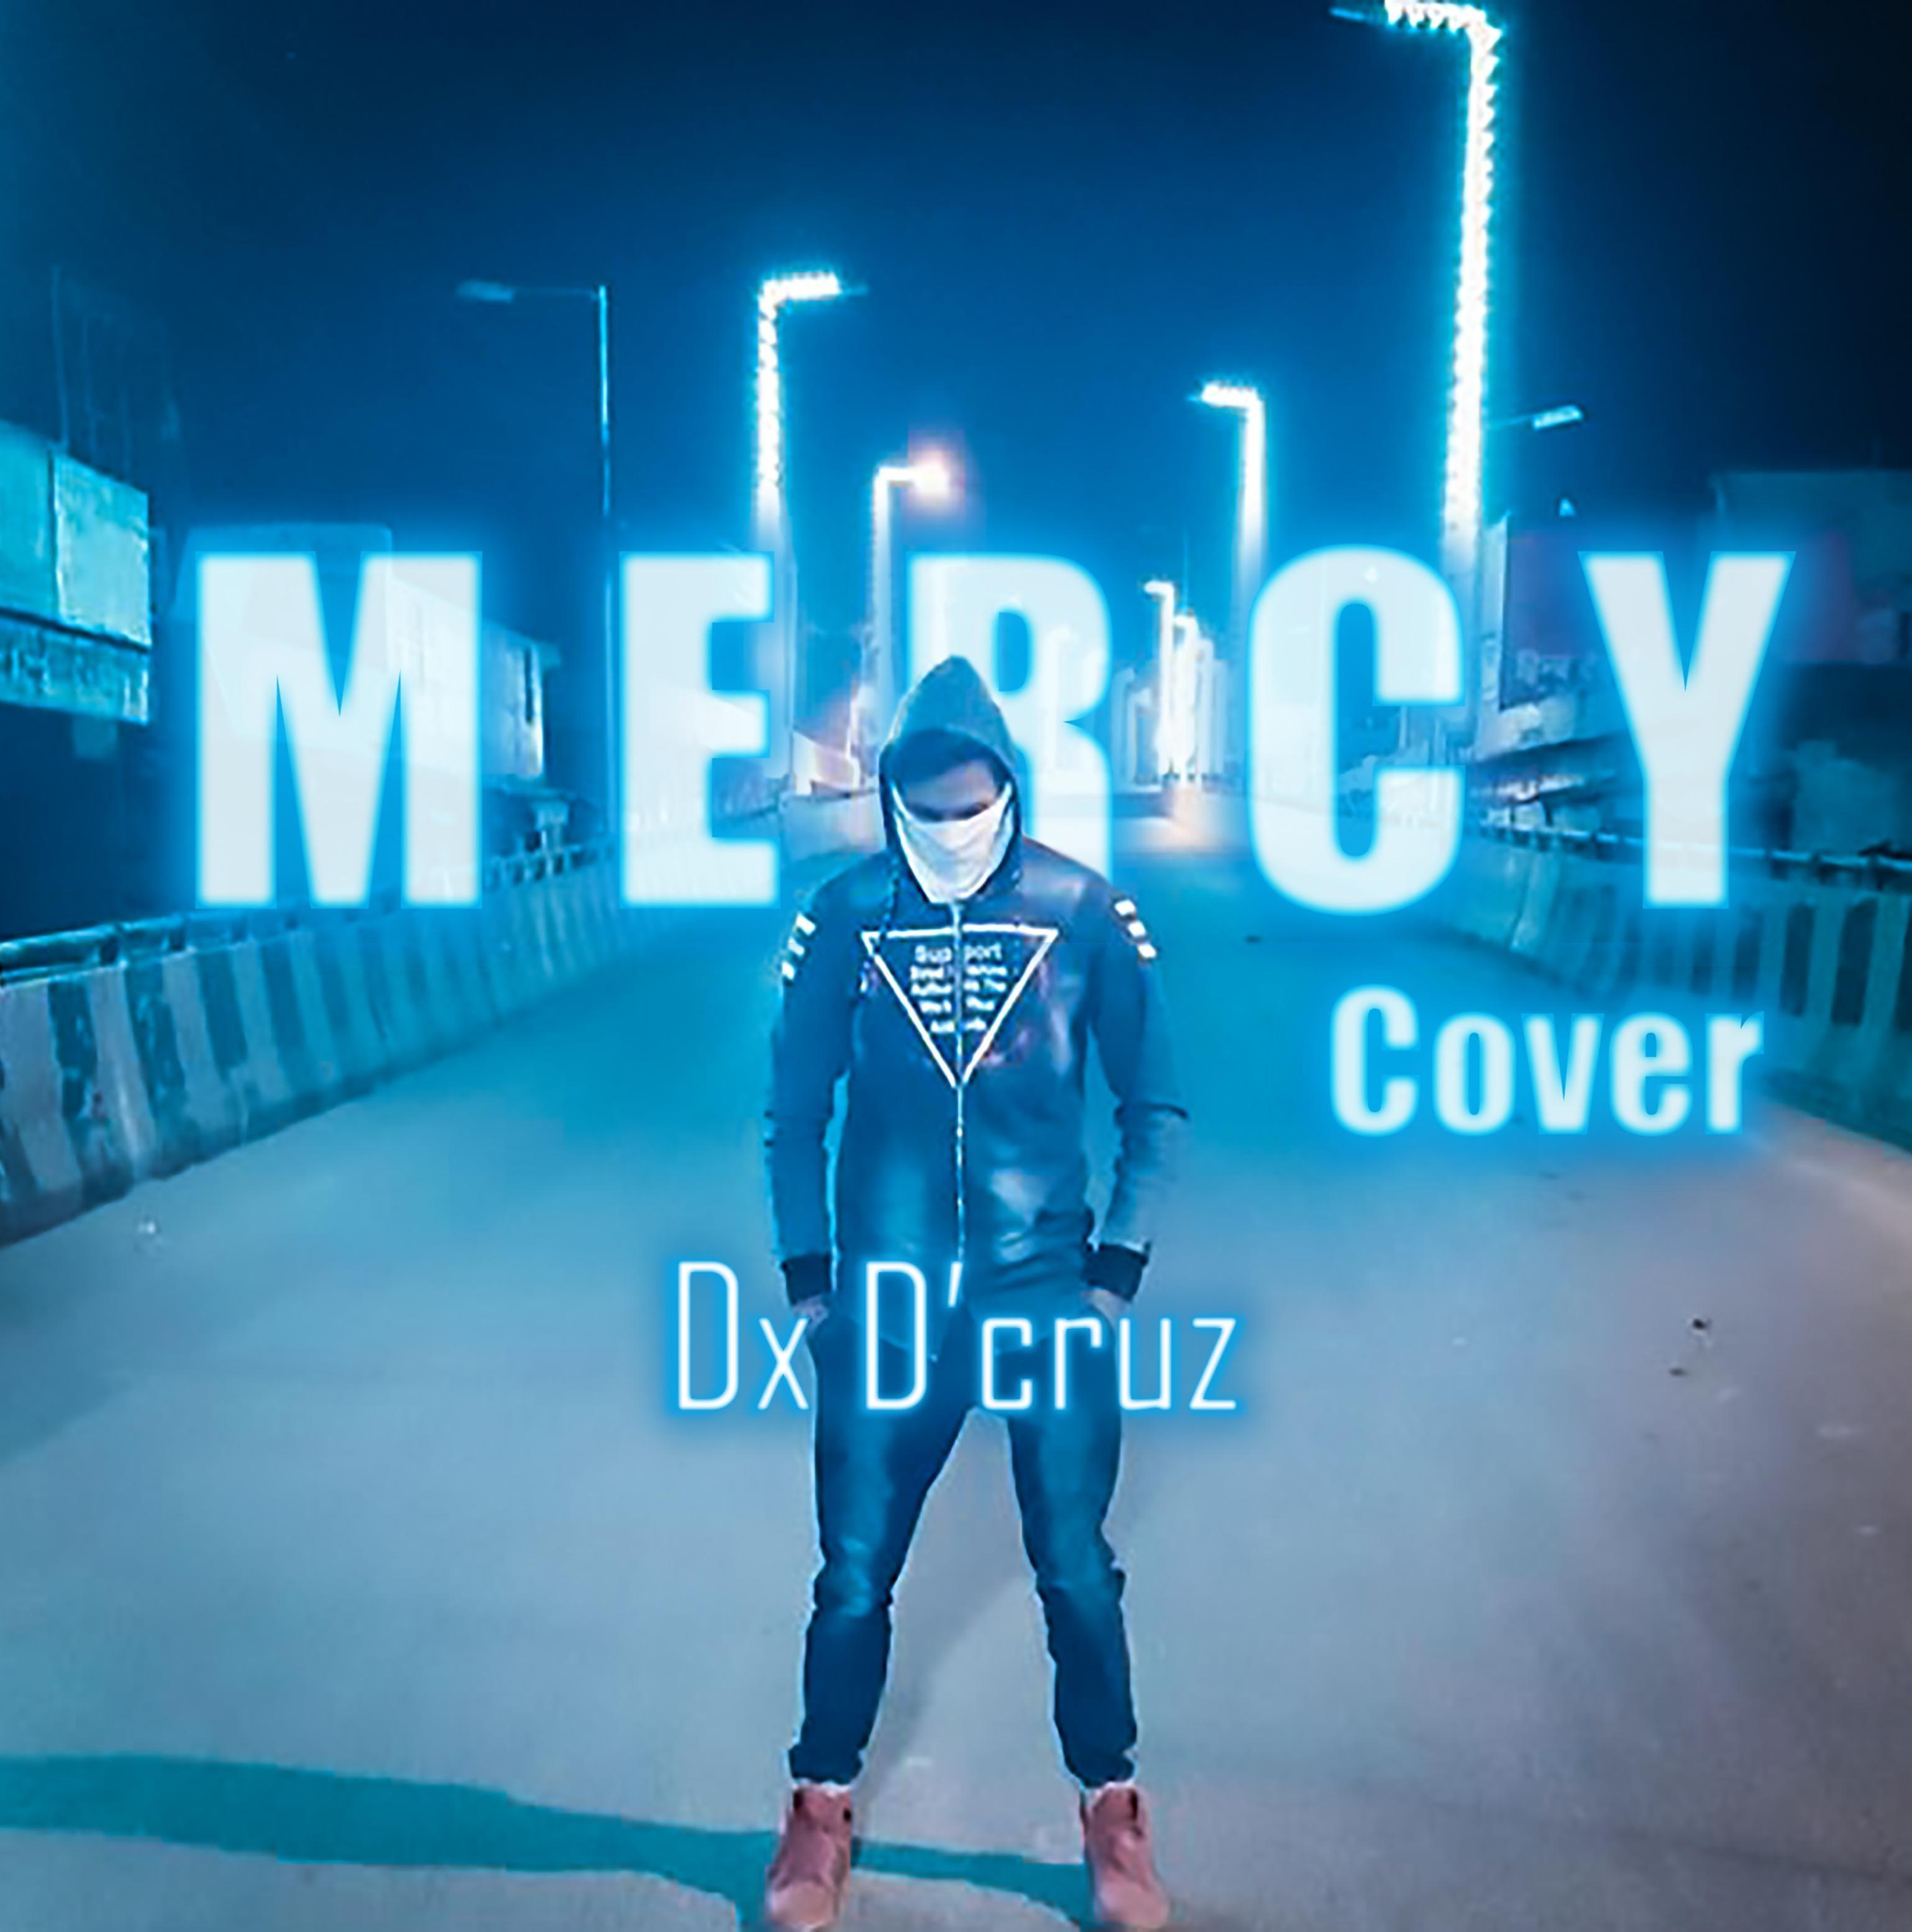 Mercy Cover by Dx D'curz